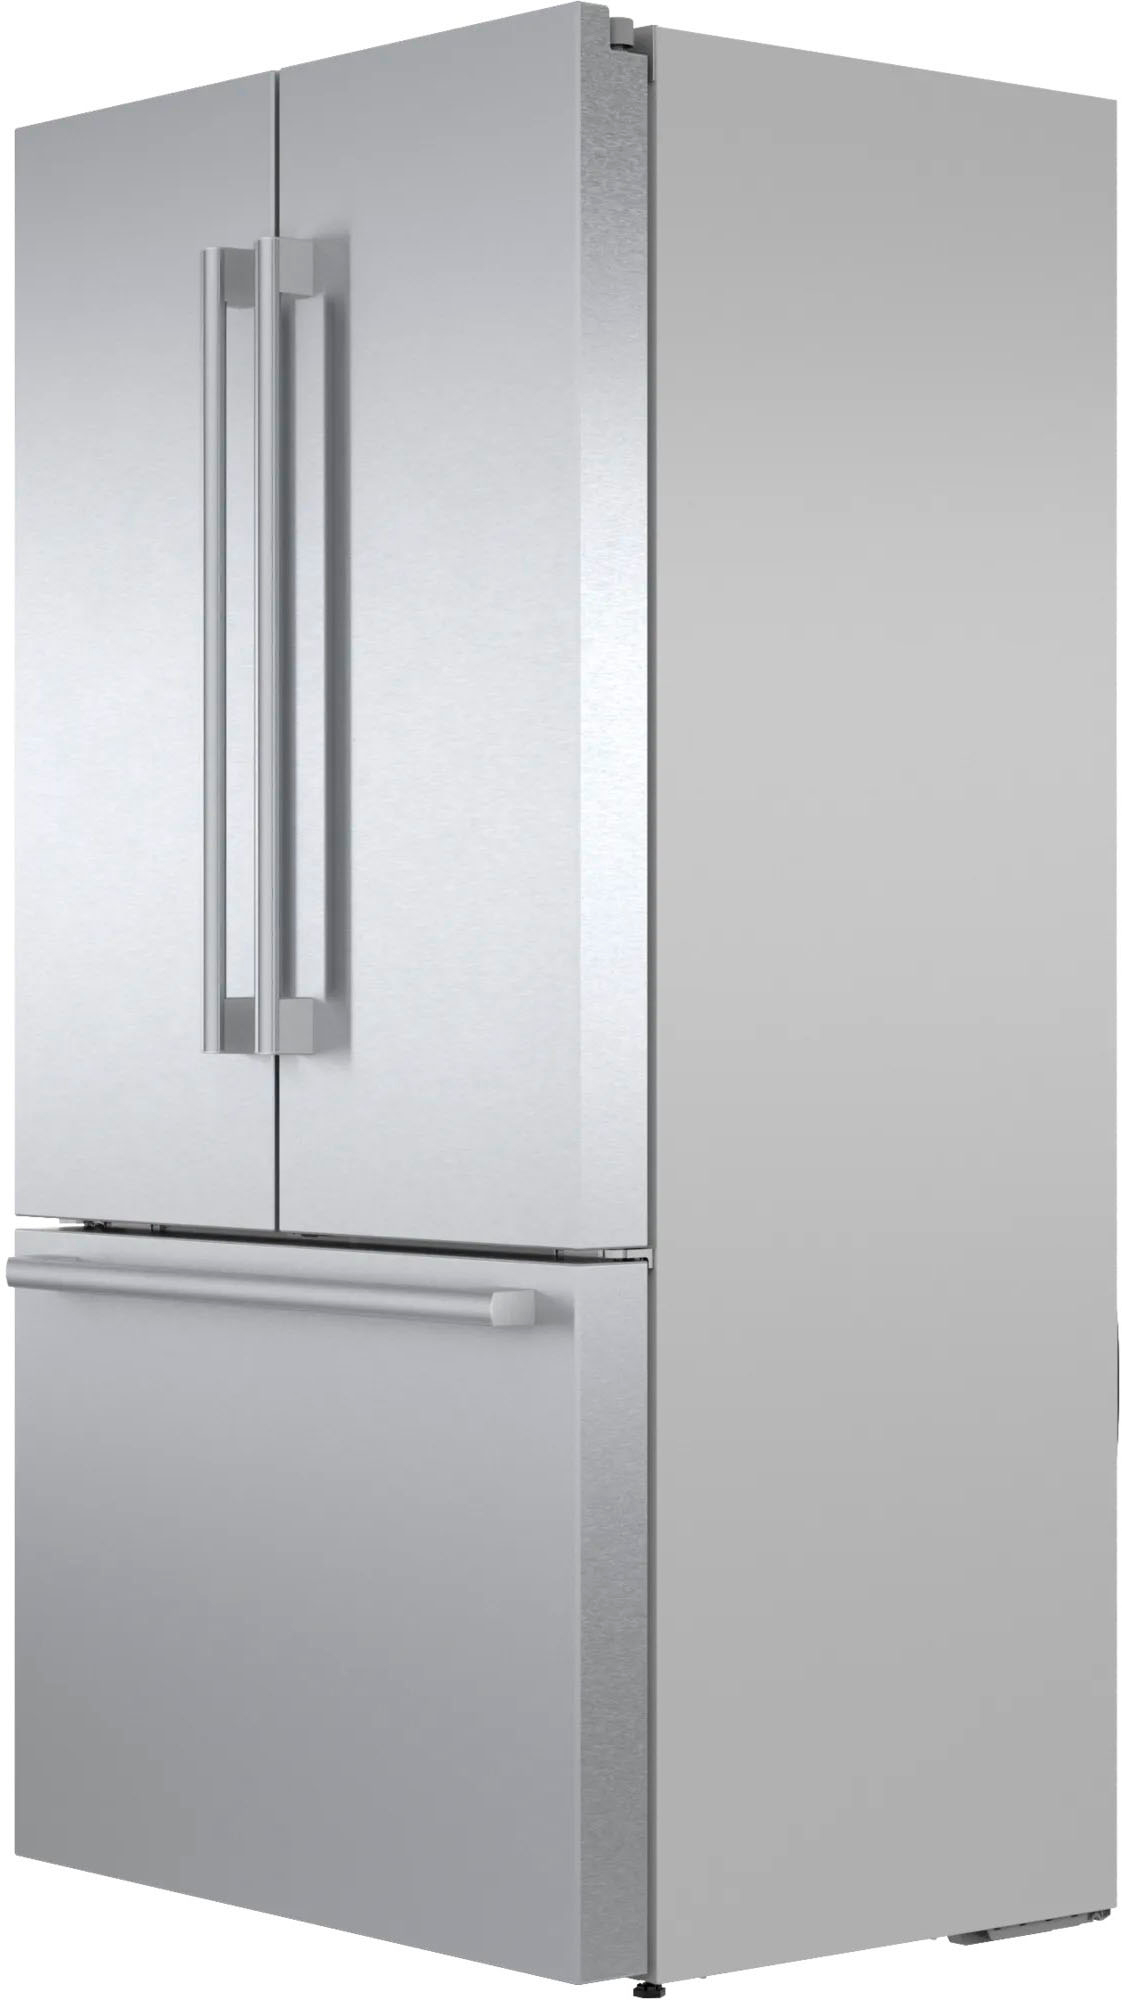 Left View: Fisher & Paykel - 13 1/2 Cu. Ft. Bottom-Freezer Counter-Depth Refrigerator - Stainless steel